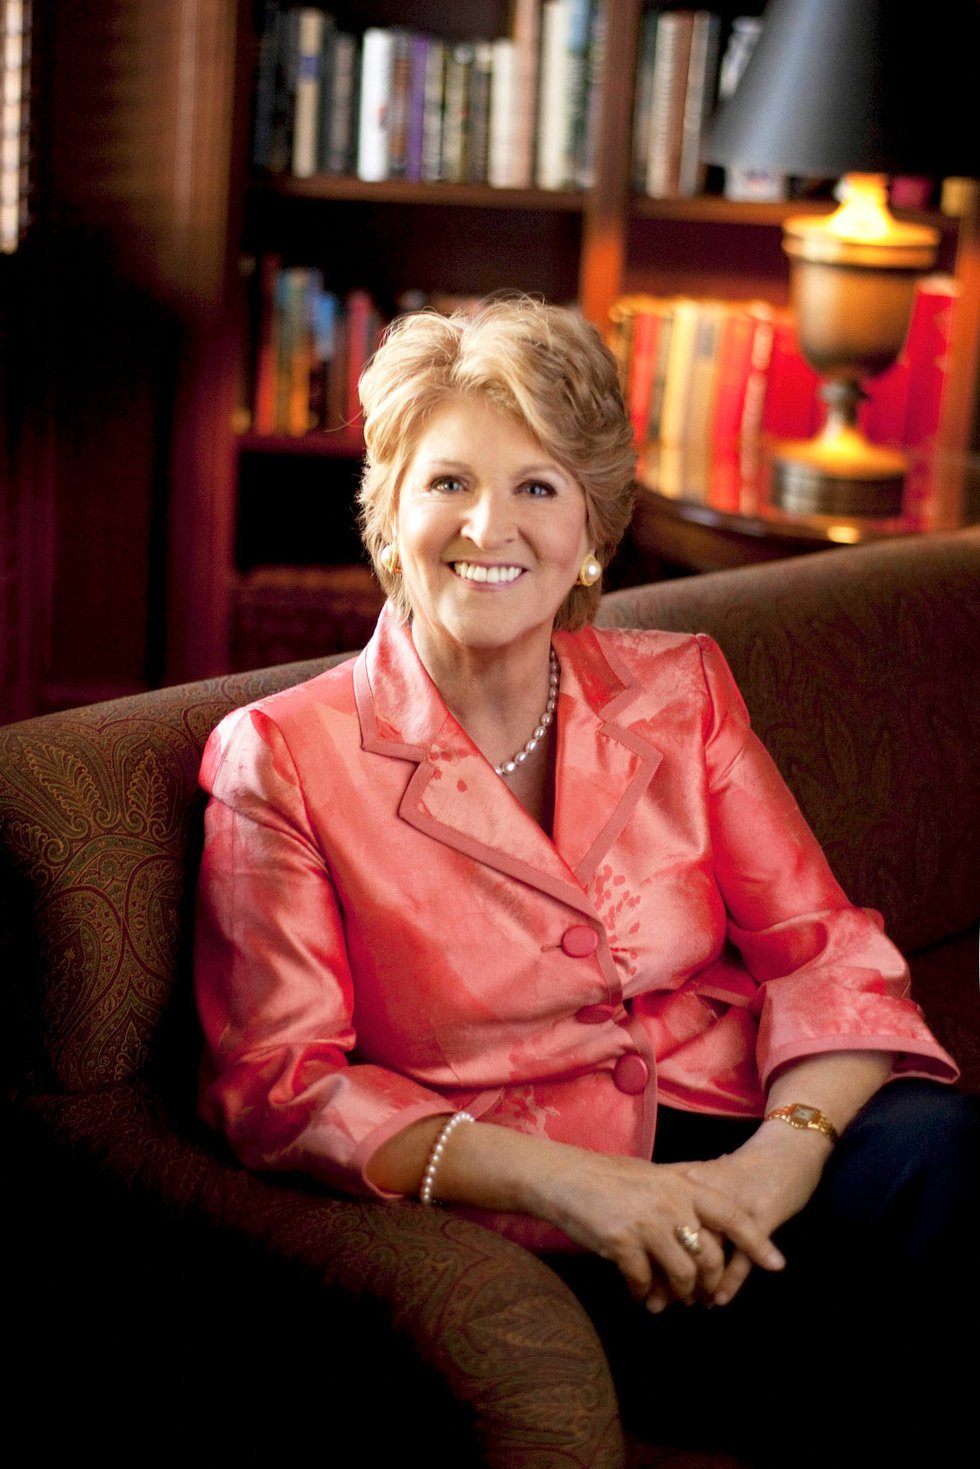 Birmingham native Fannie Flagg returns to Whistle Stop in new novel